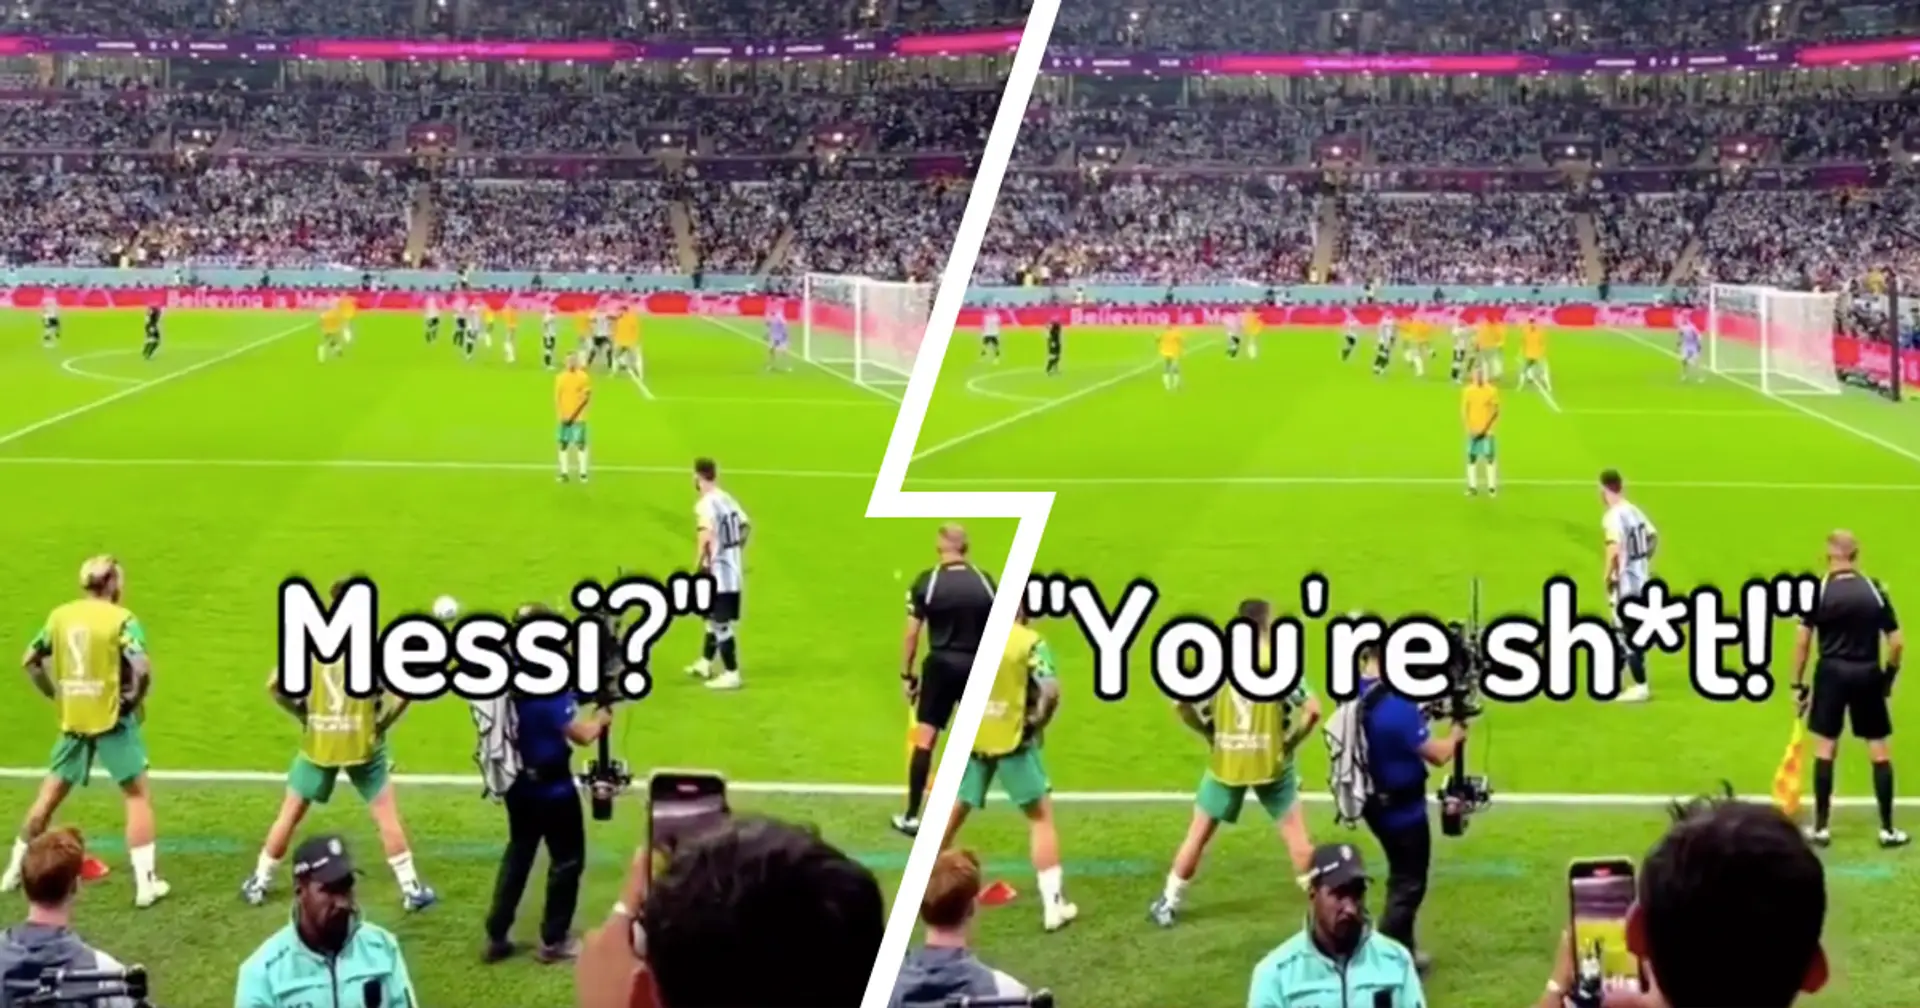 Australia fans chant 'where is Messi?' – how Leo responds 12 seconds later